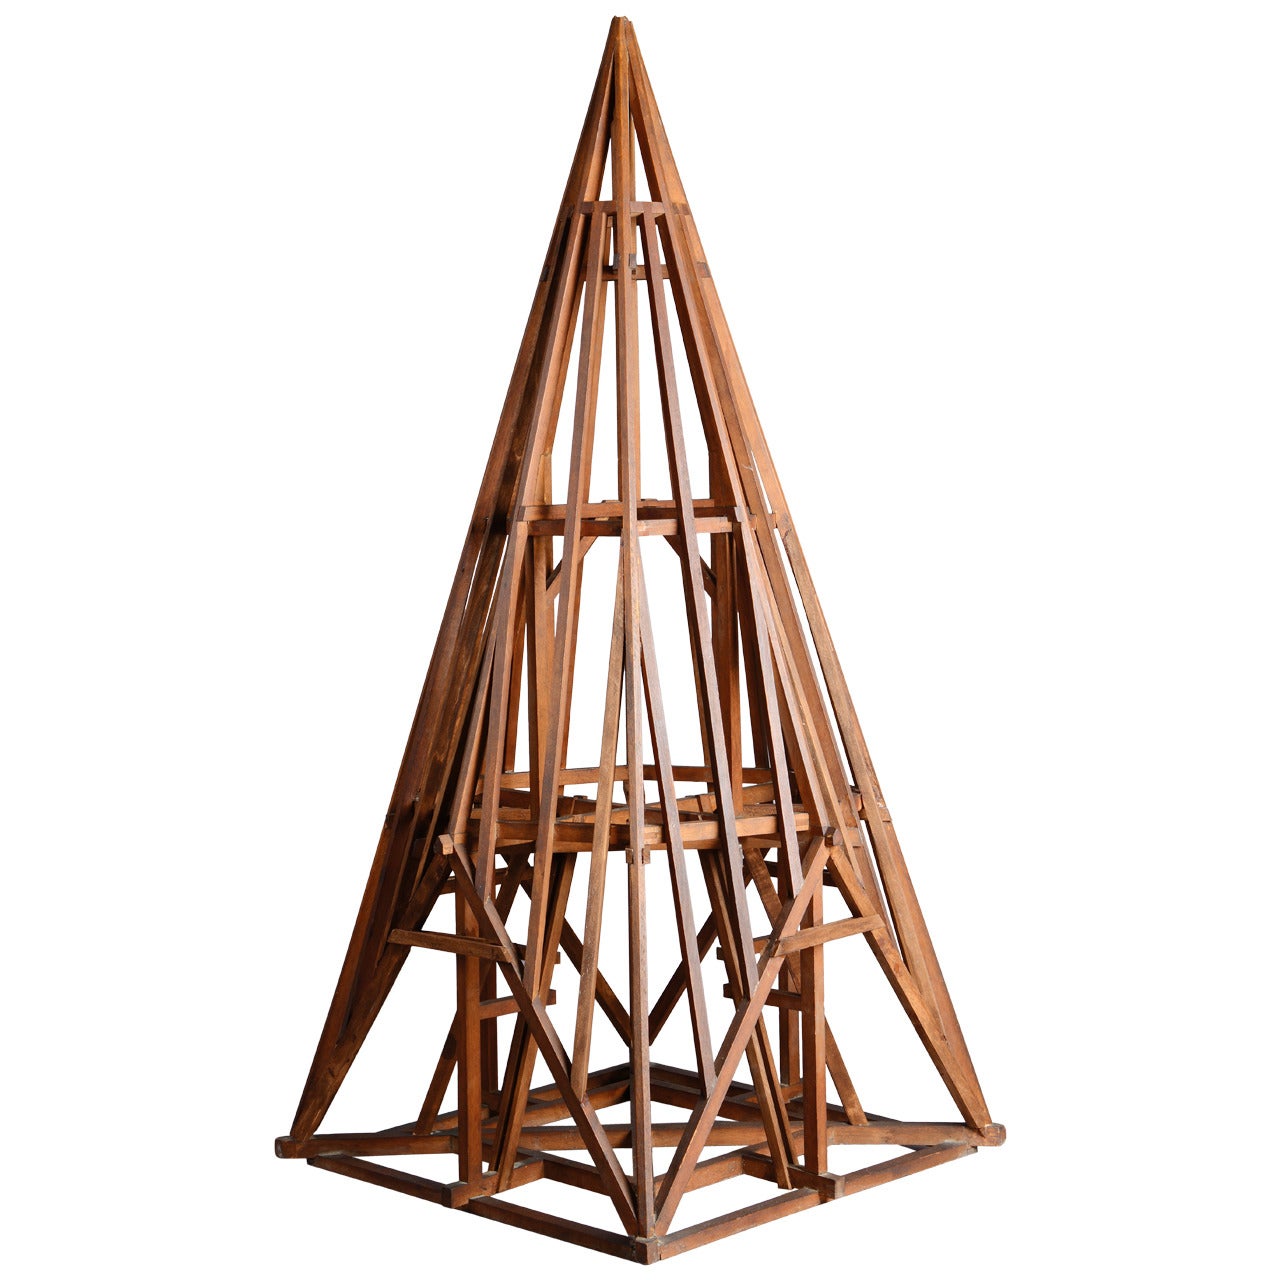 19th Century Didactical Architecture Model of a Roof Truss For Sale